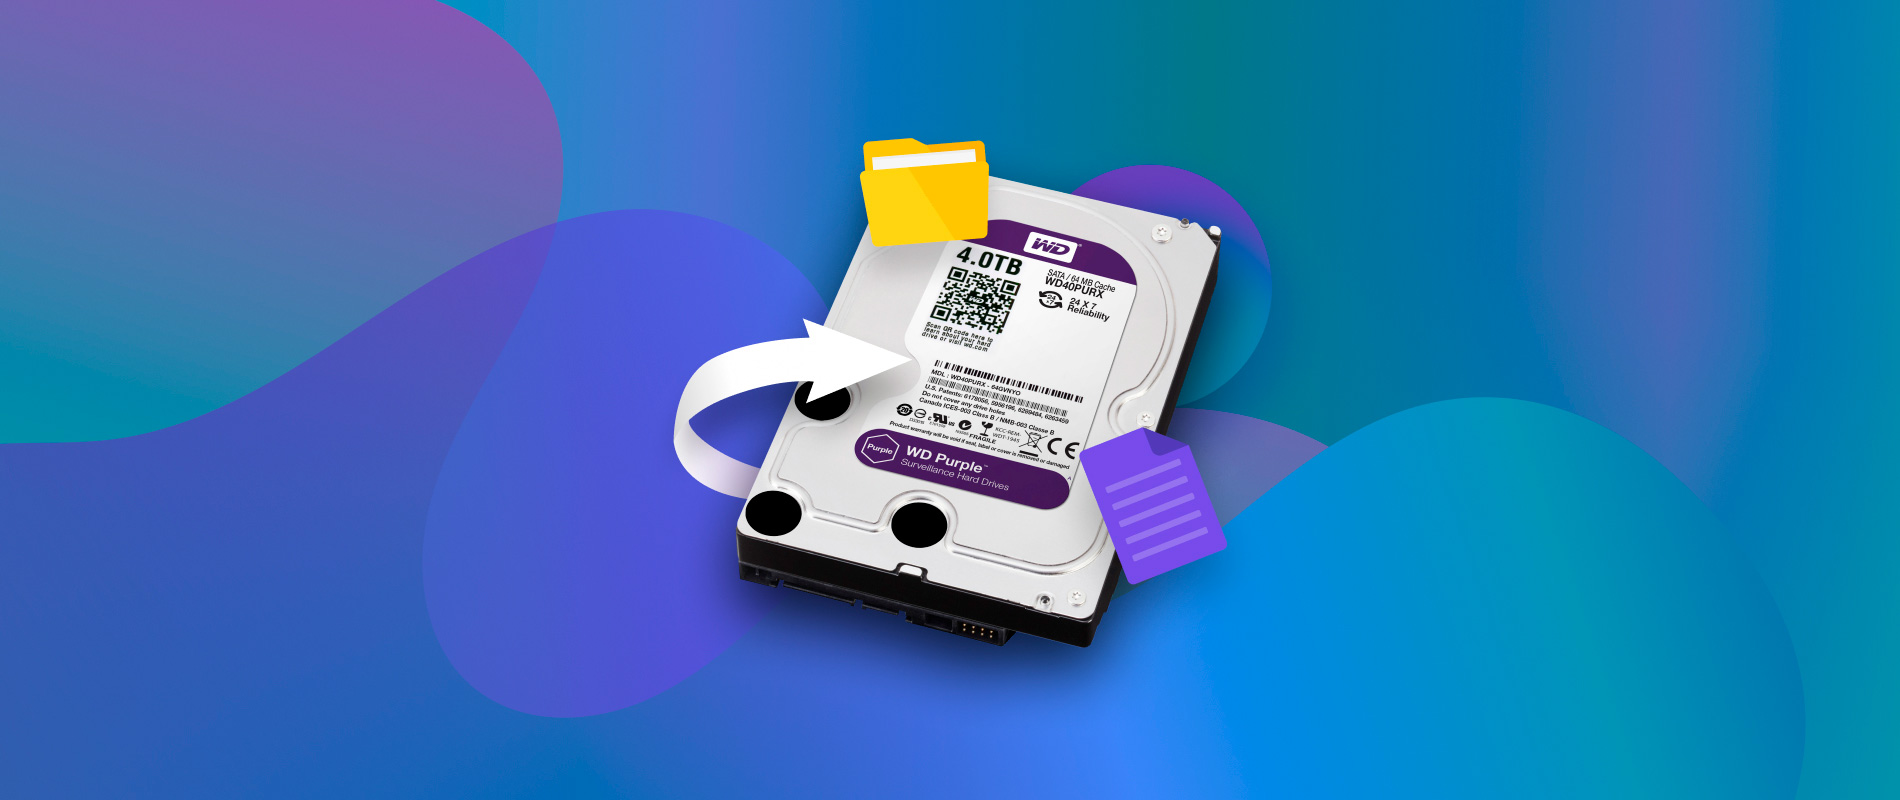 thespian magi punkt How to Recover Data from Western Digital Hard Drives & My Book NAS